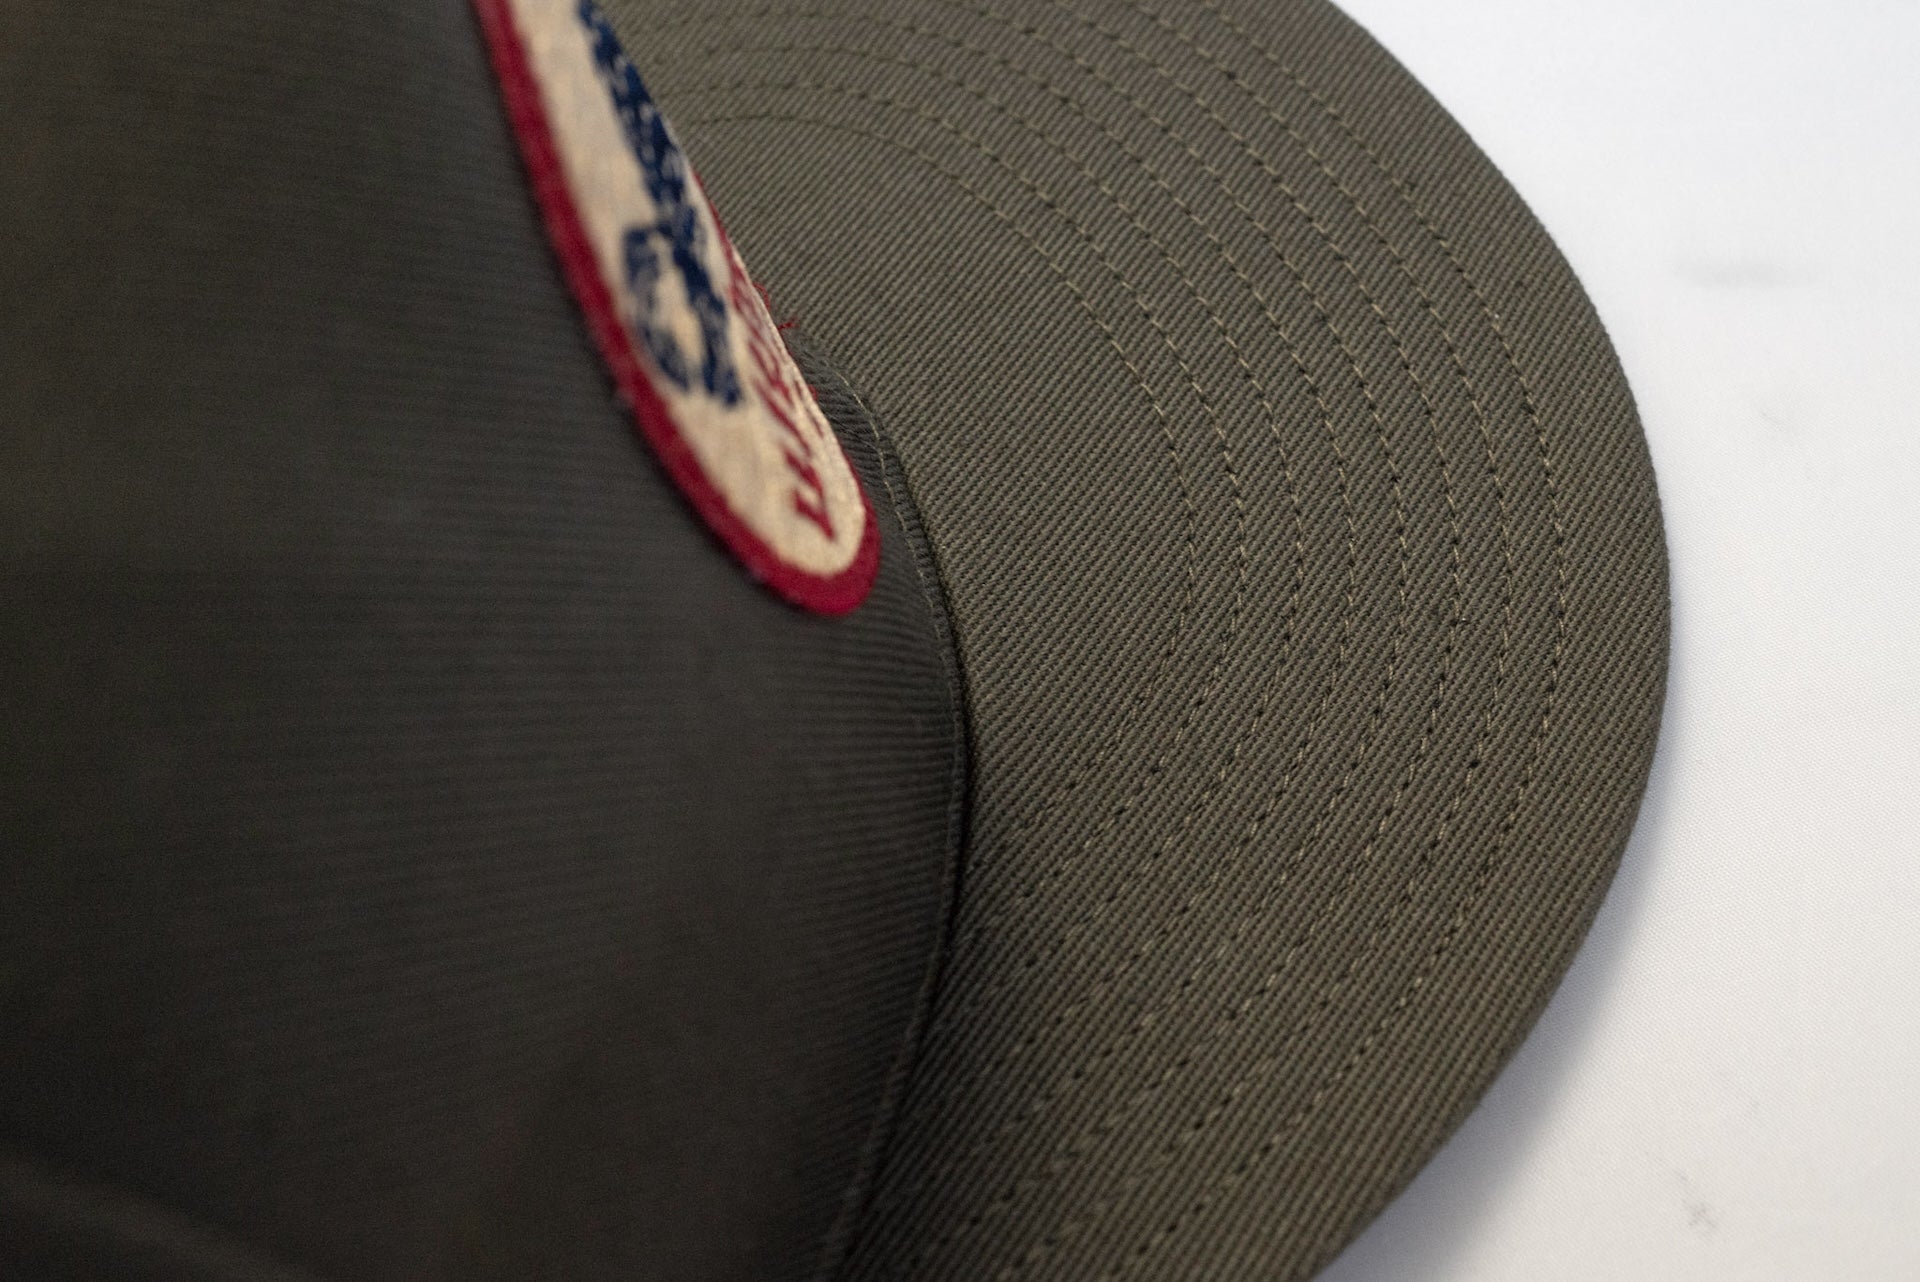 Ultima Thule by Freewheelers "Ancient Monster" Crest Vent Cap (Olive)